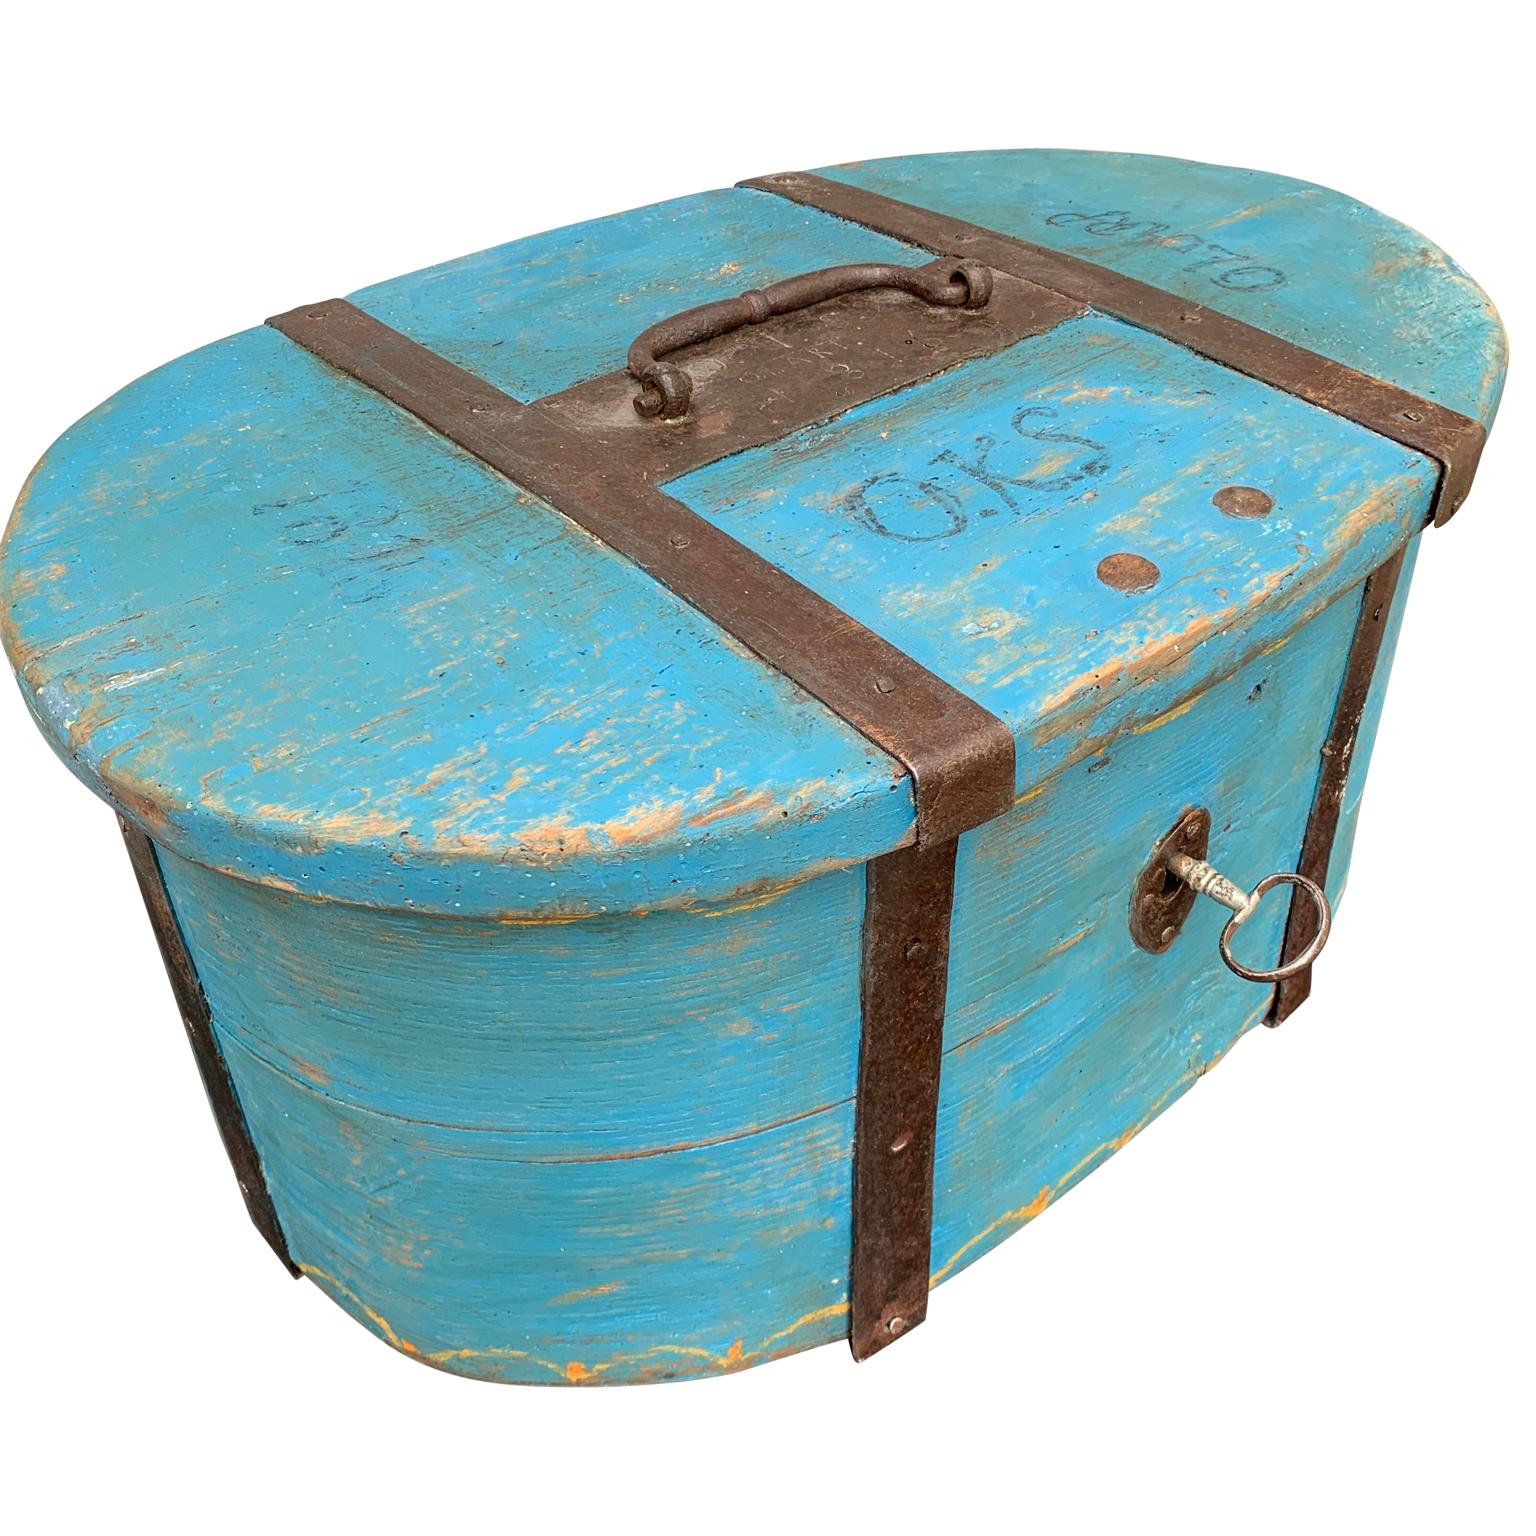 Swedish Folk Art box, with original blue painted decorations and lock with working key. Dated 1816 in the iron.